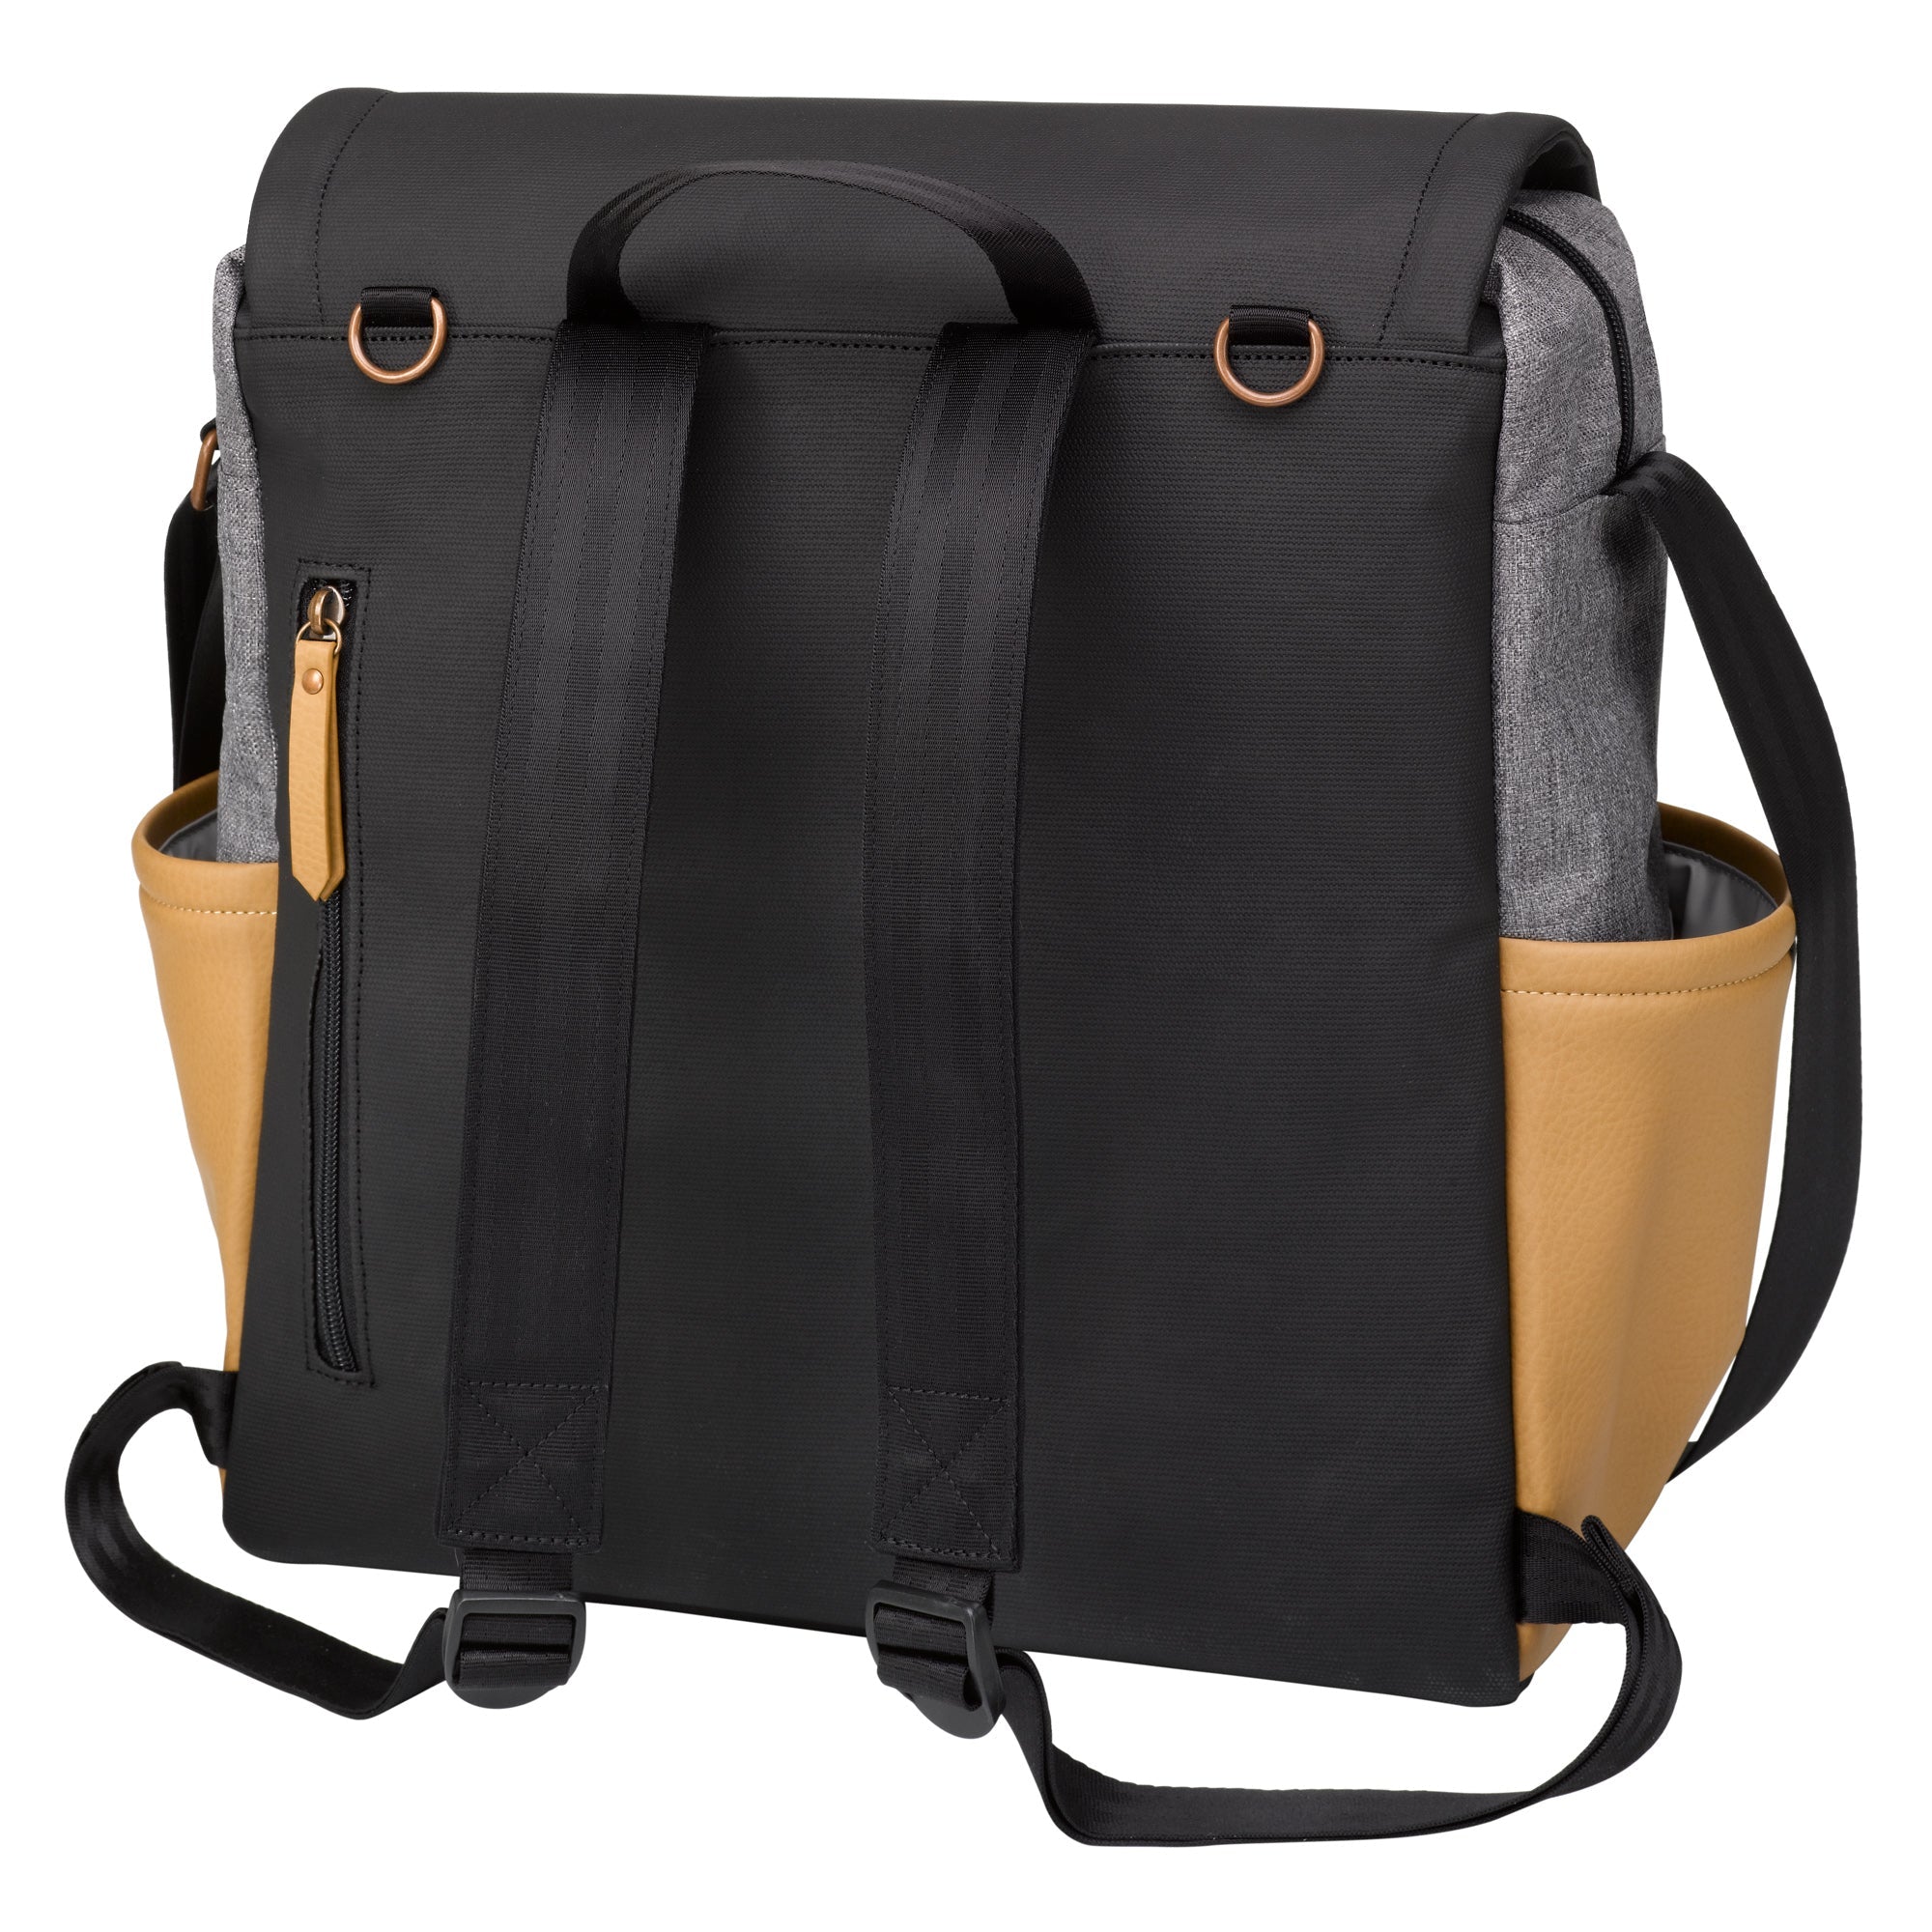 Petunia Pickle Bottom Boxy Backpack in Graphite/Camel